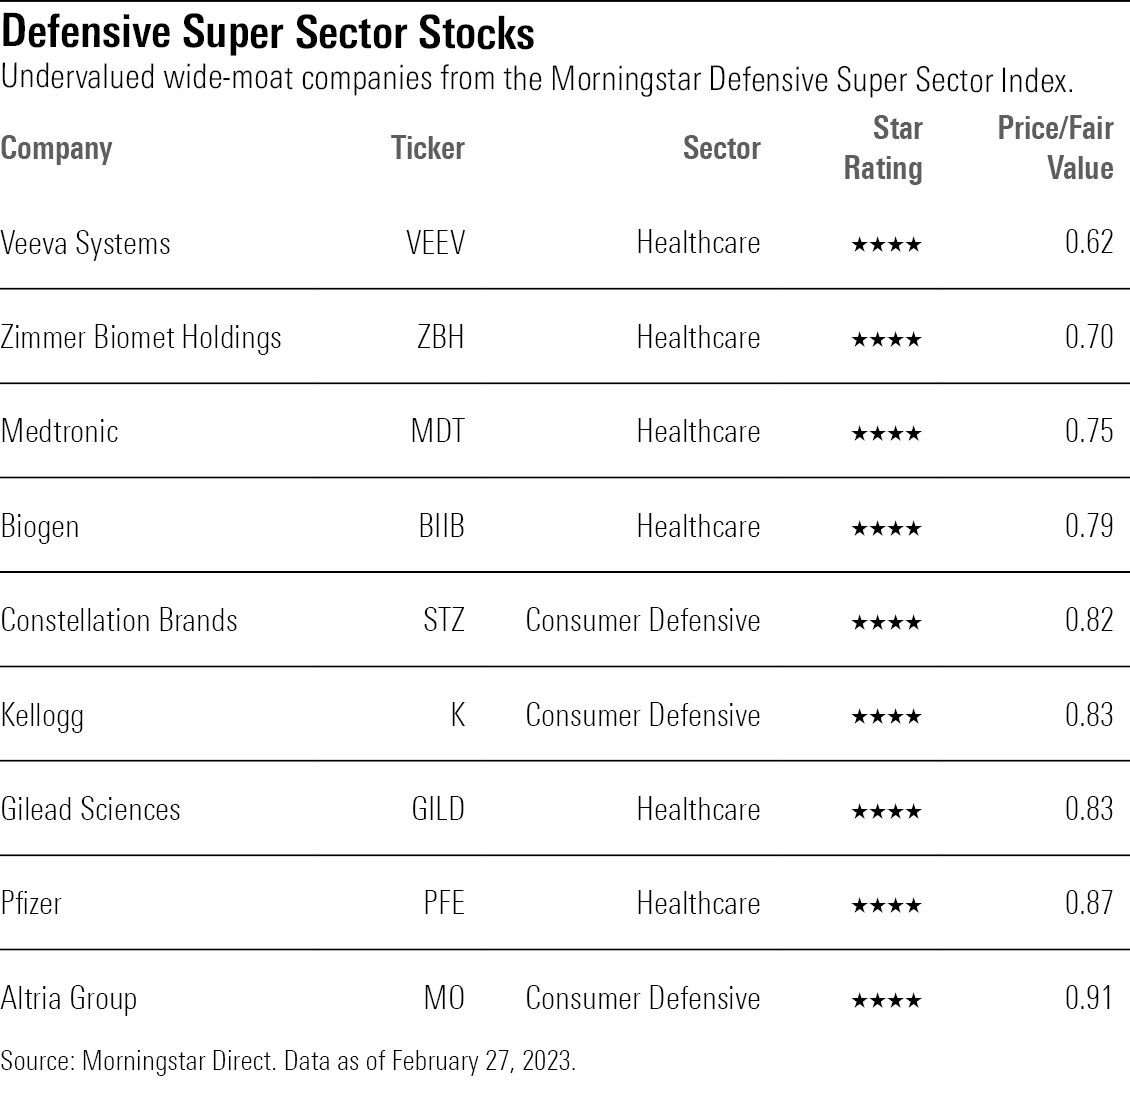 List of the 9 most undervalued wide-moat companies from the Morningstar Defensive Super Sector Index.